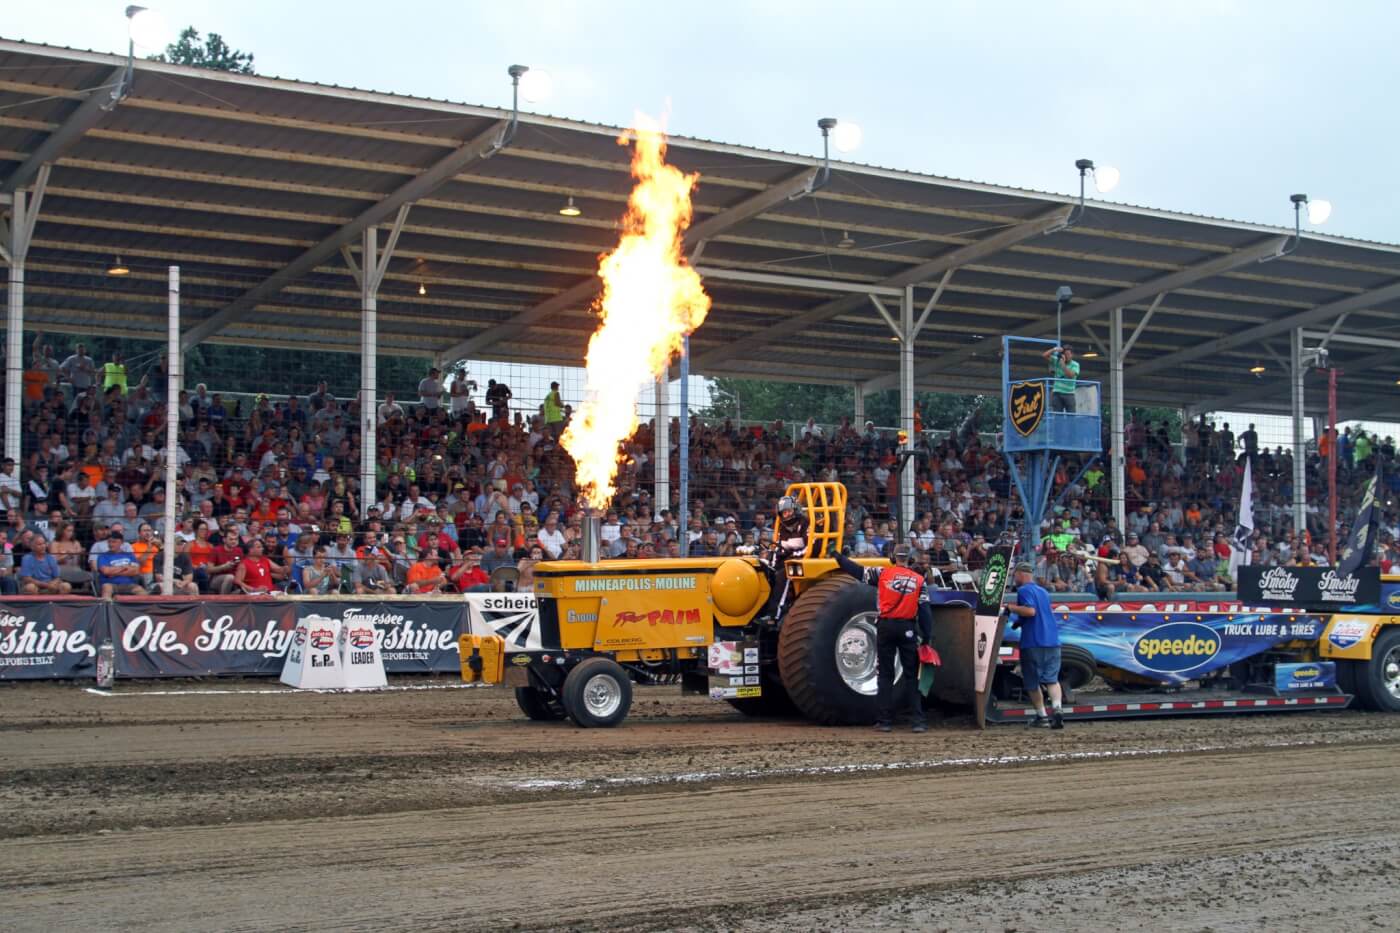 Running a tractor on BBQ juice can lead to flame-overs like this. We'll stick to good ol’ #2 in our pulling vehicles, thank you!